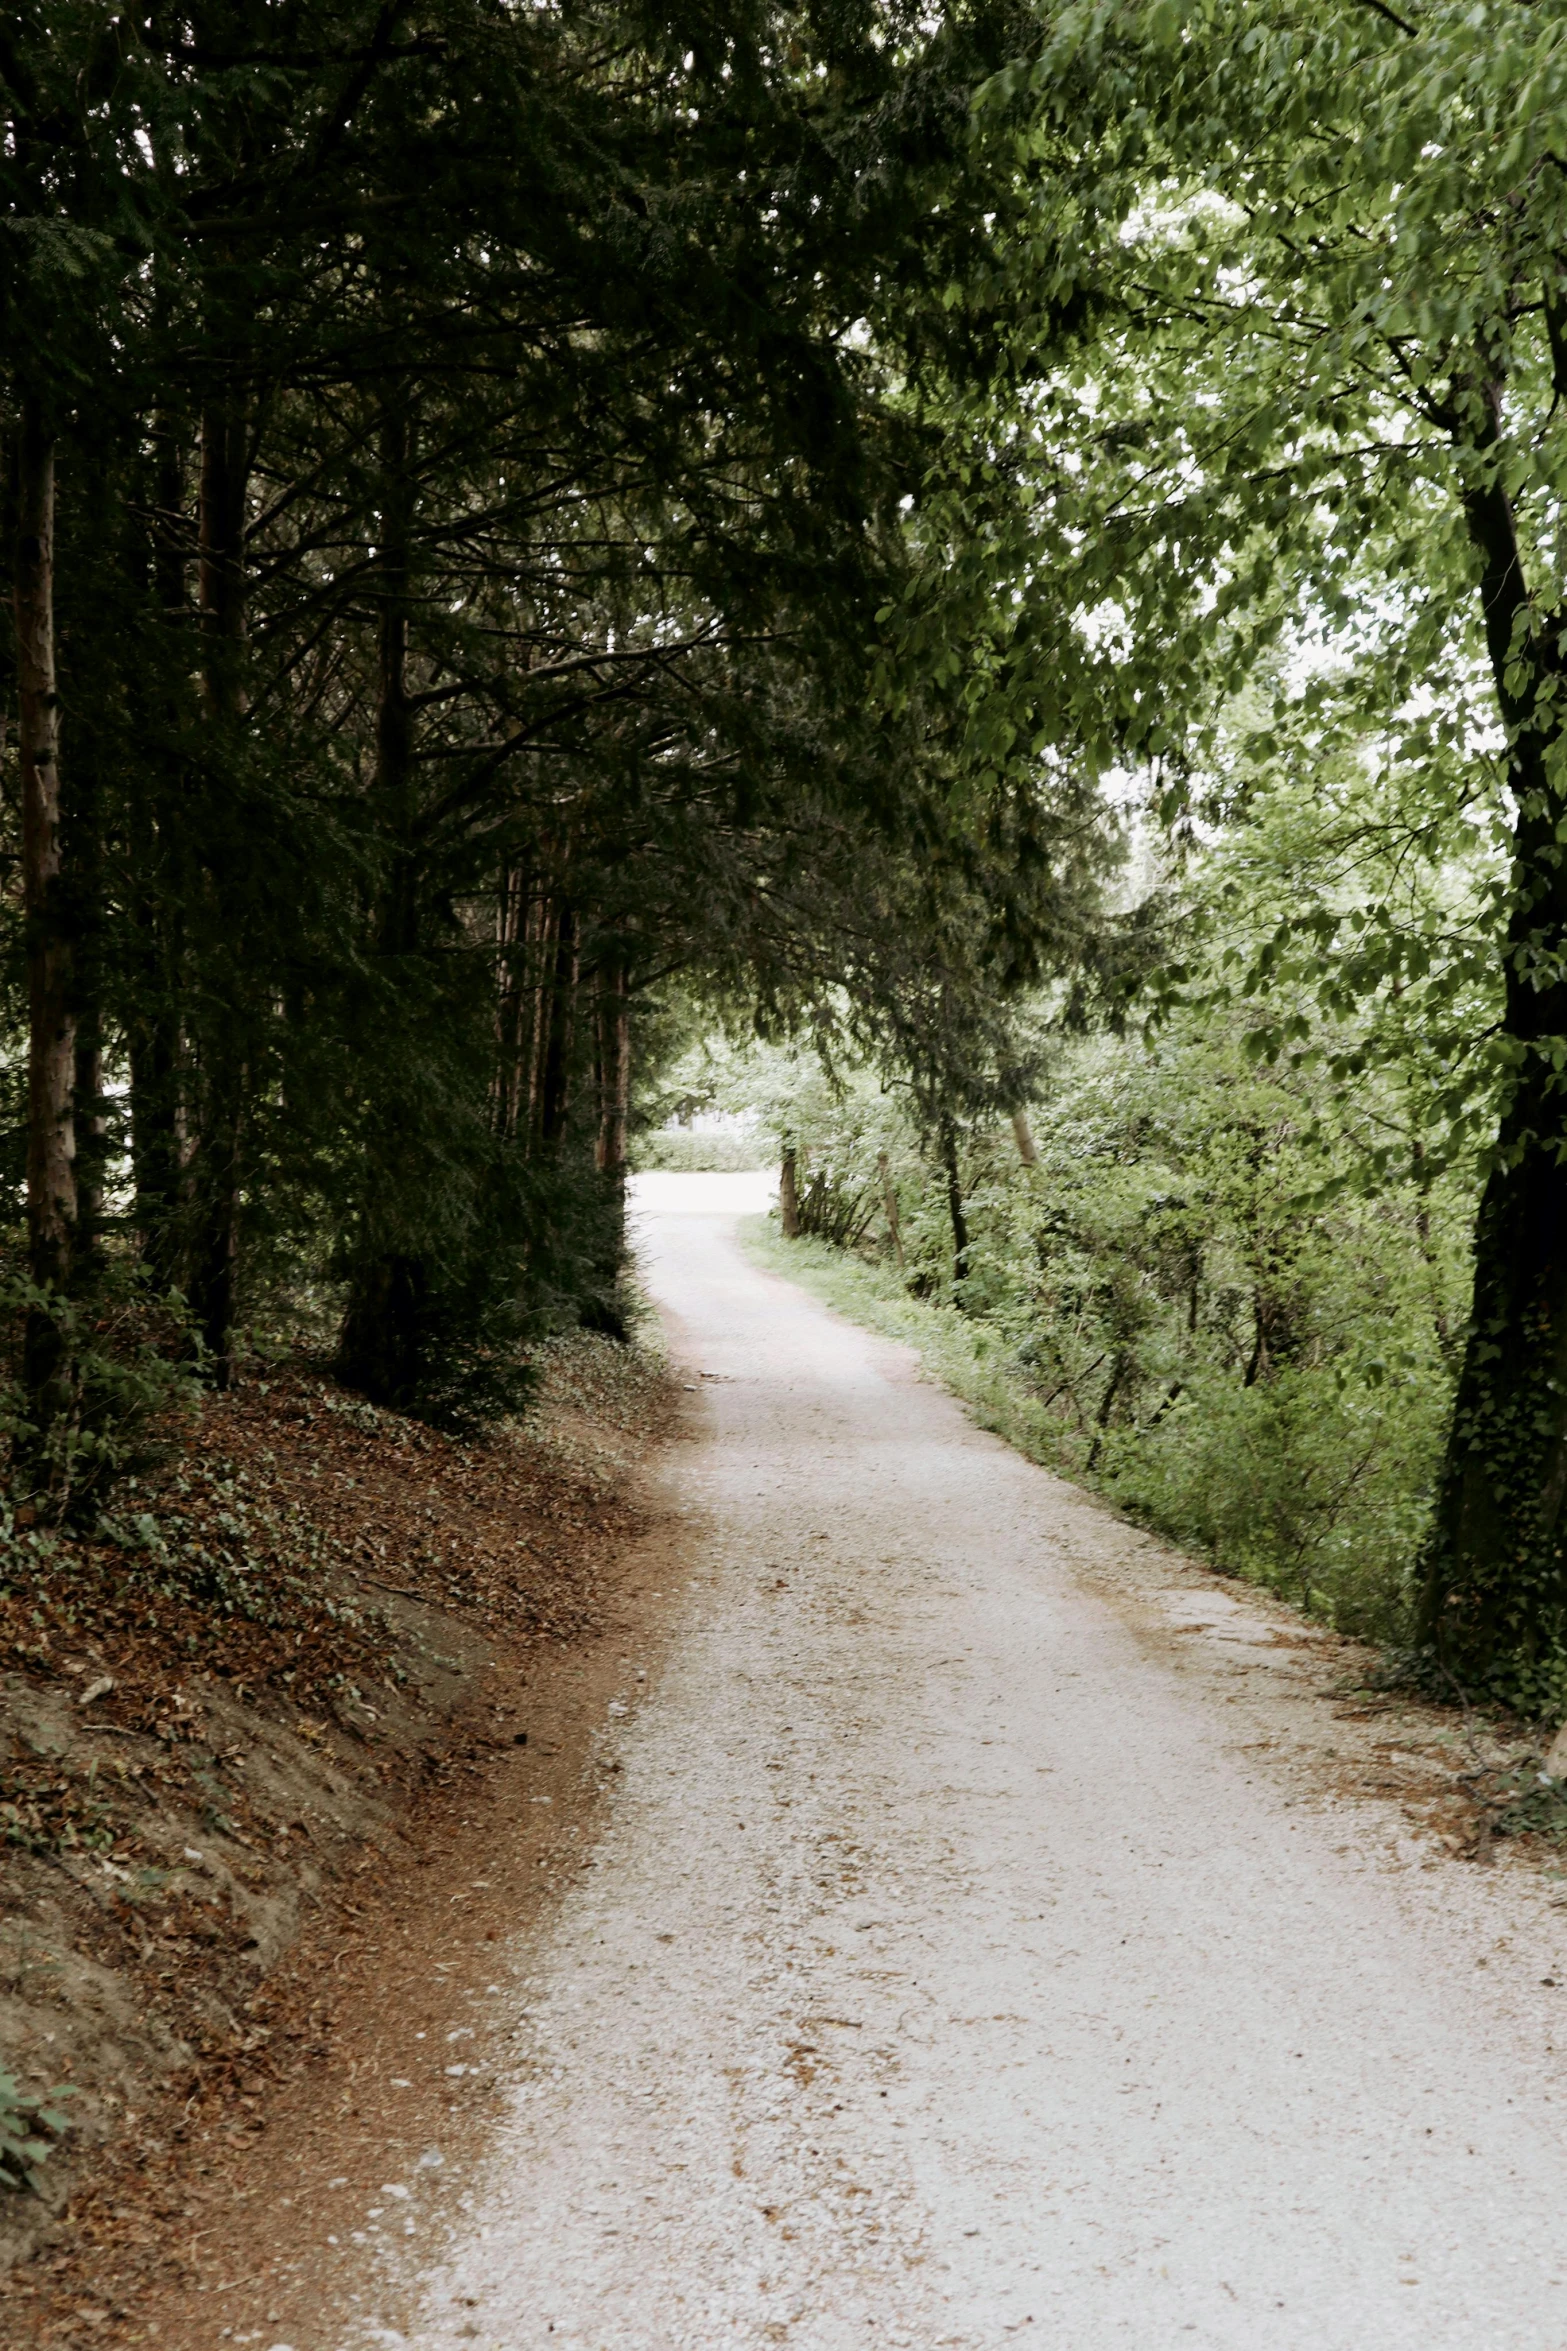 a man riding a bike down a dirt road, a picture, by Lucia Peka, unsplash, renaissance, a beautiful pathway in a forest, 2 5 6 x 2 5 6 pixels, lourmarin, panorama